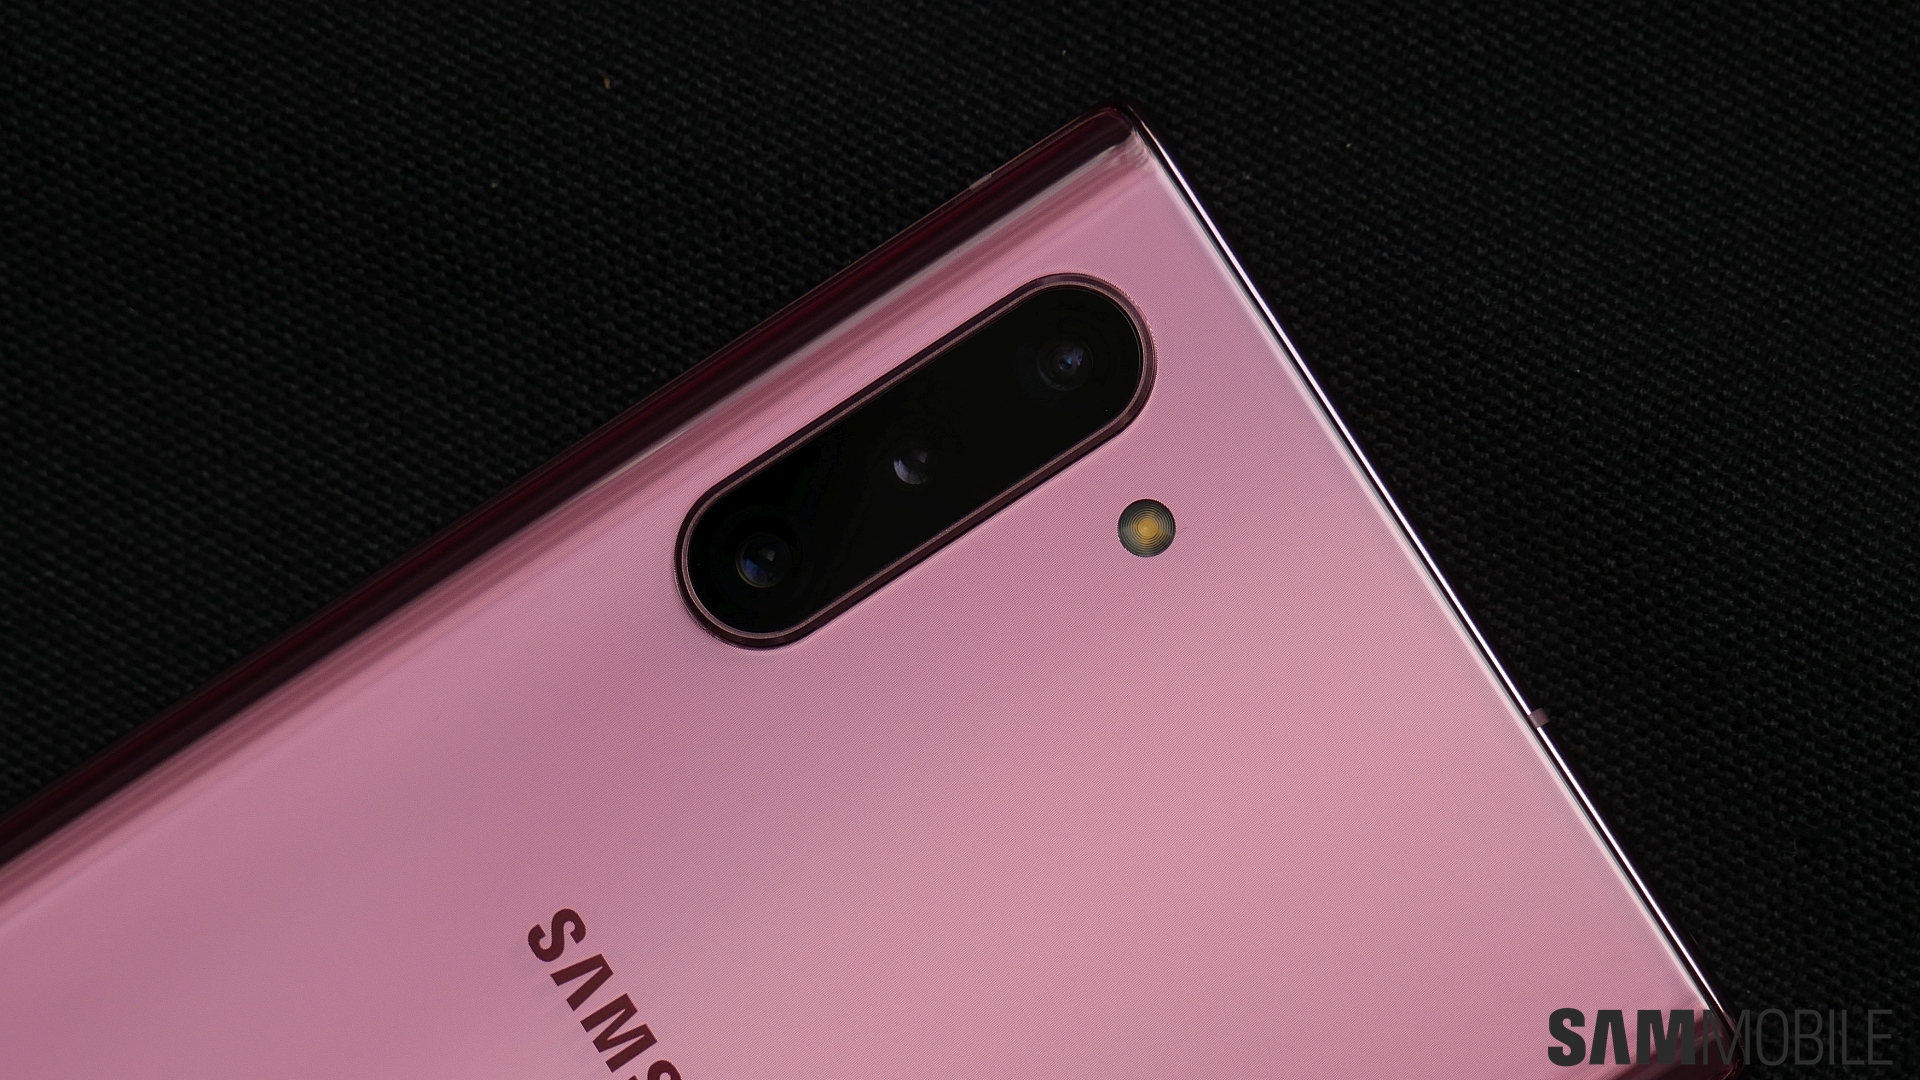 Galaxy Note 10 hands-on videos show off the latest features - SamMobile